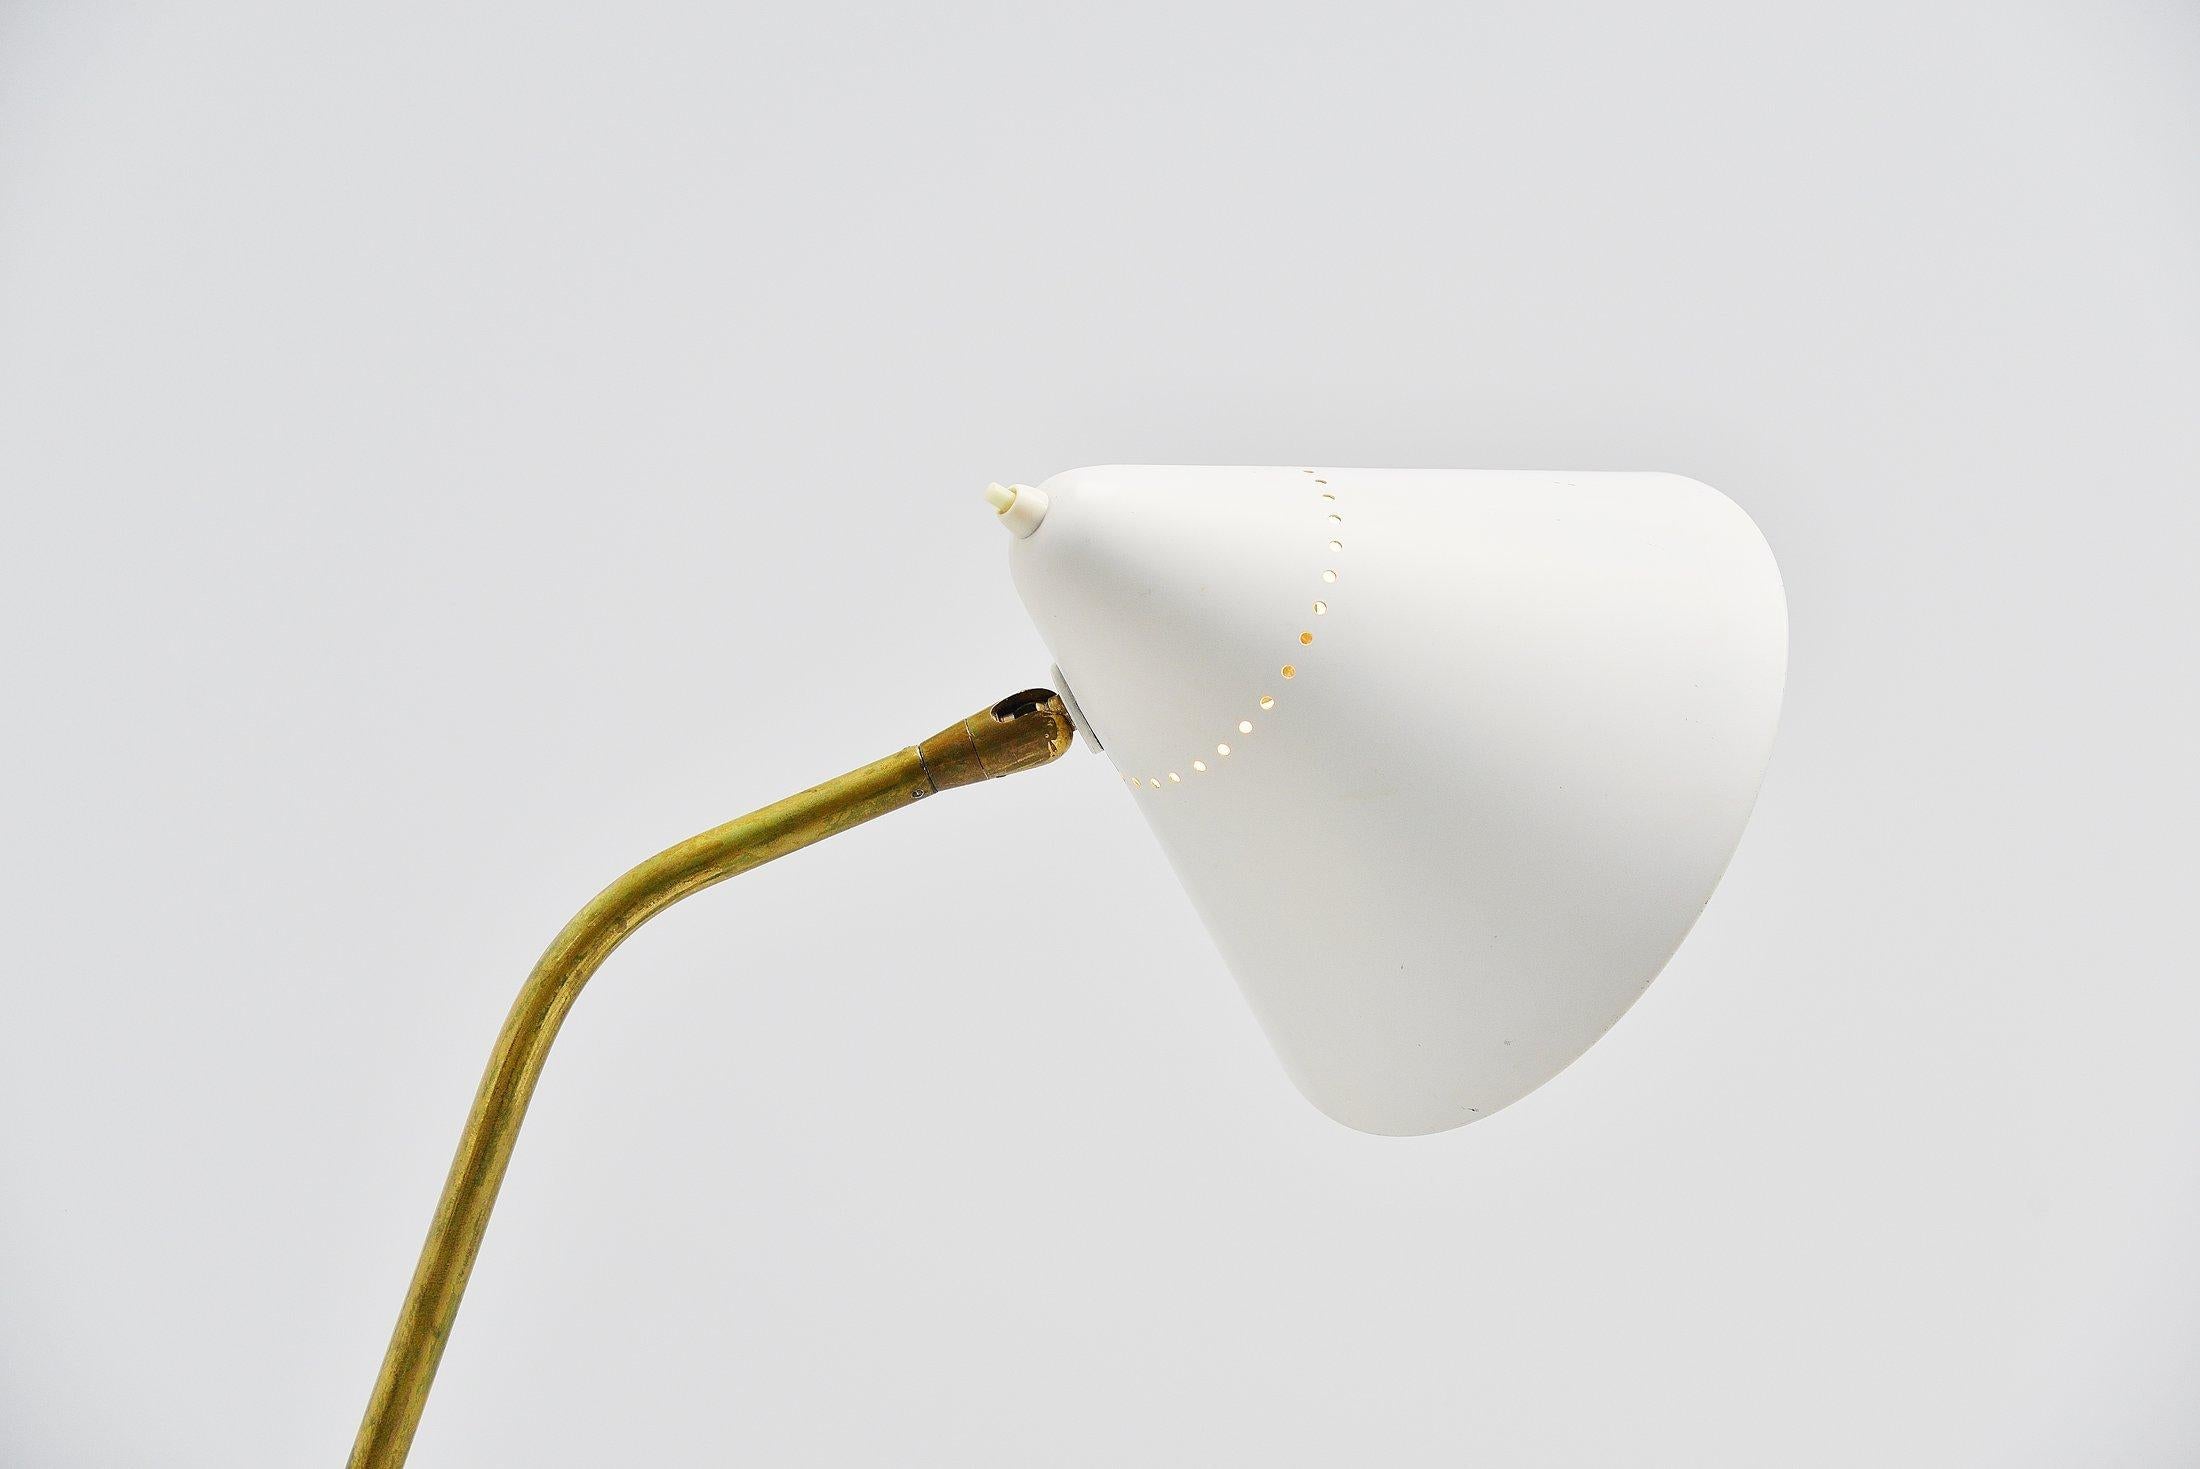 Very nice and sophisticated floor lamp designed by Giuseppe Ostuni and manufactured by Oluce, Italy, 1952. This lamp has a stem that is adjustable in angle and the shade is as well. Very nice solid brass stem with and of white aluminum shade and